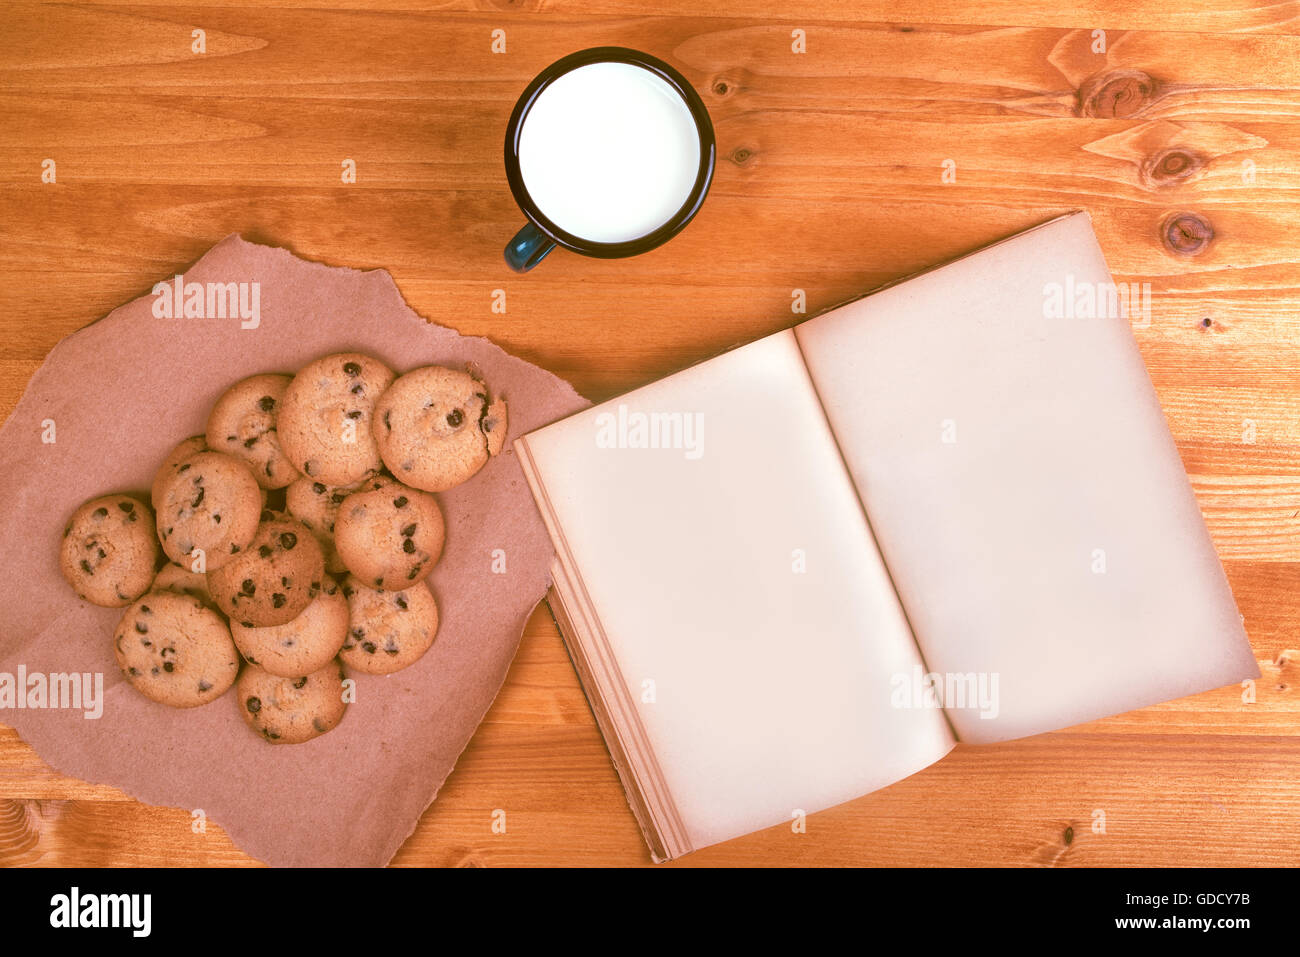 Homemade chocolate chip cookies, milk cup and open vintage recipe book on rustic wooden table, top view Stock Photo